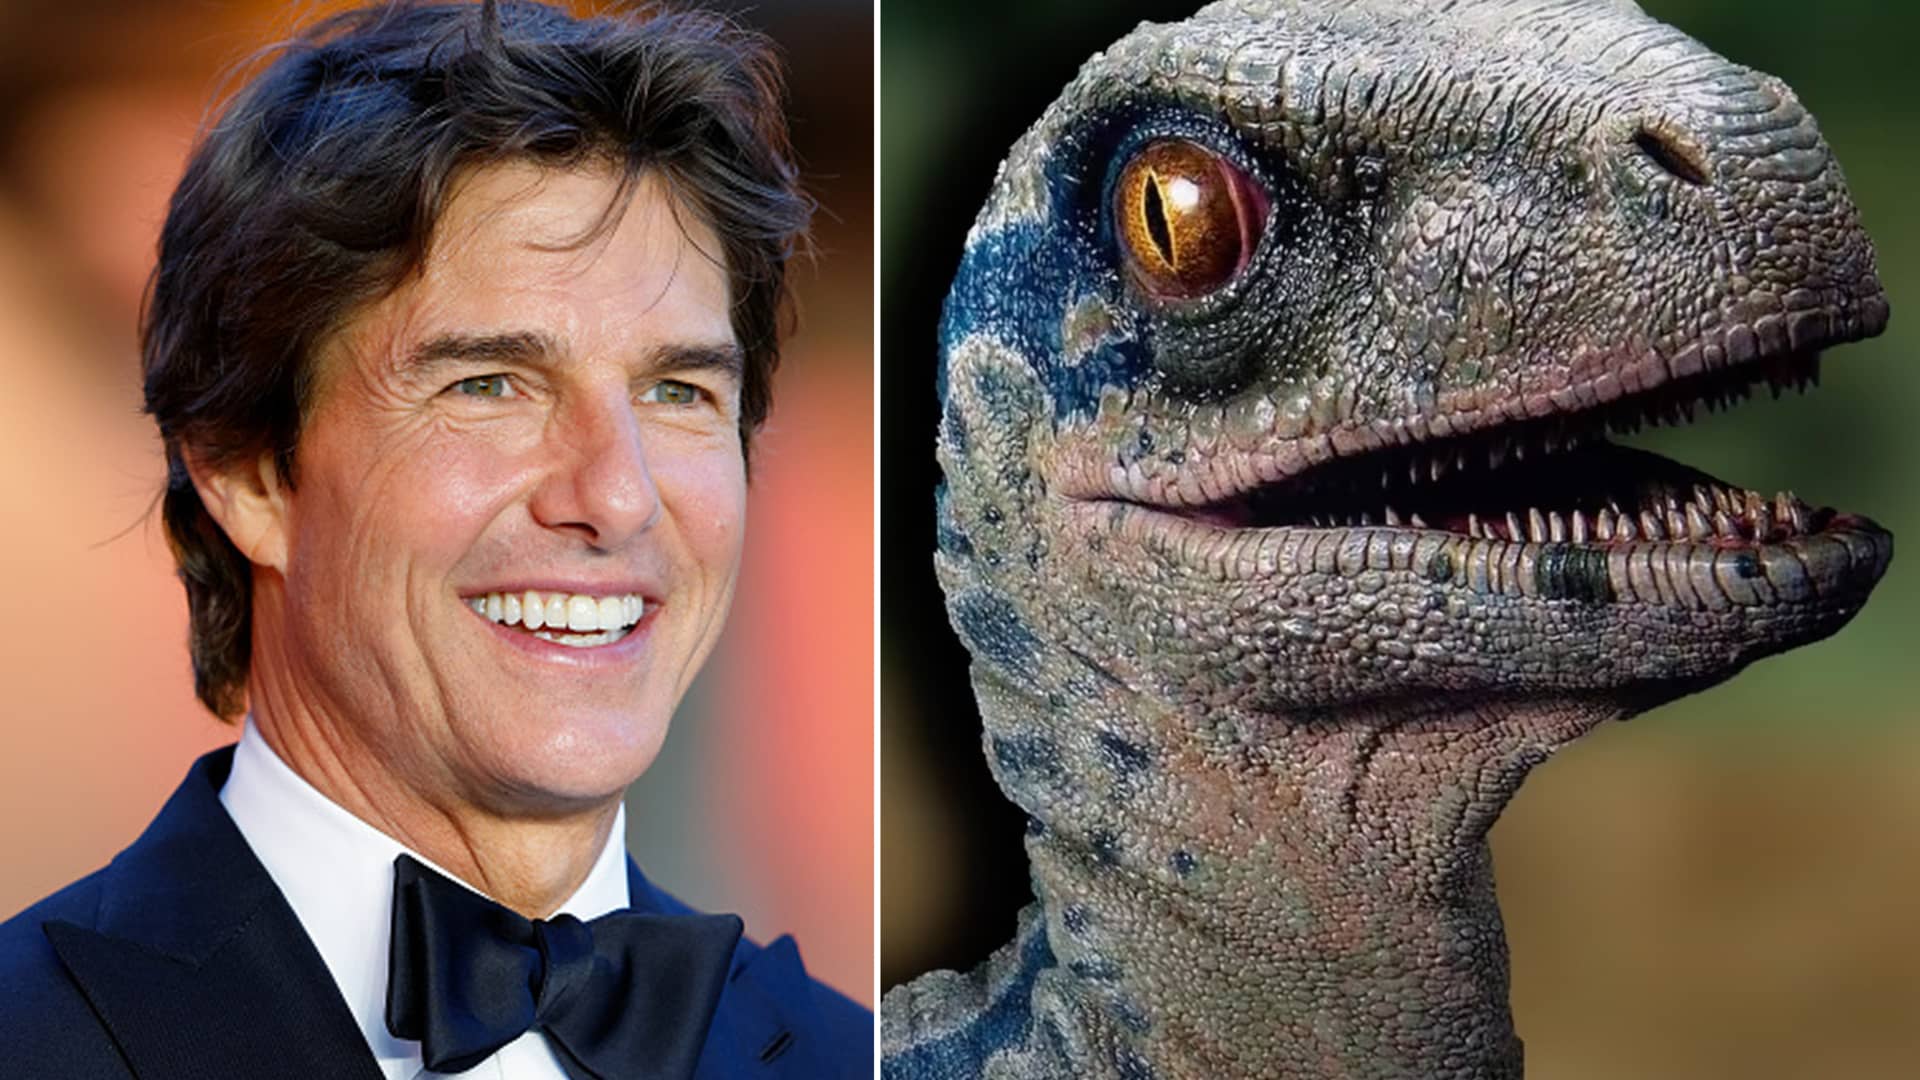 Dinosaurs face off against Tom Cruise